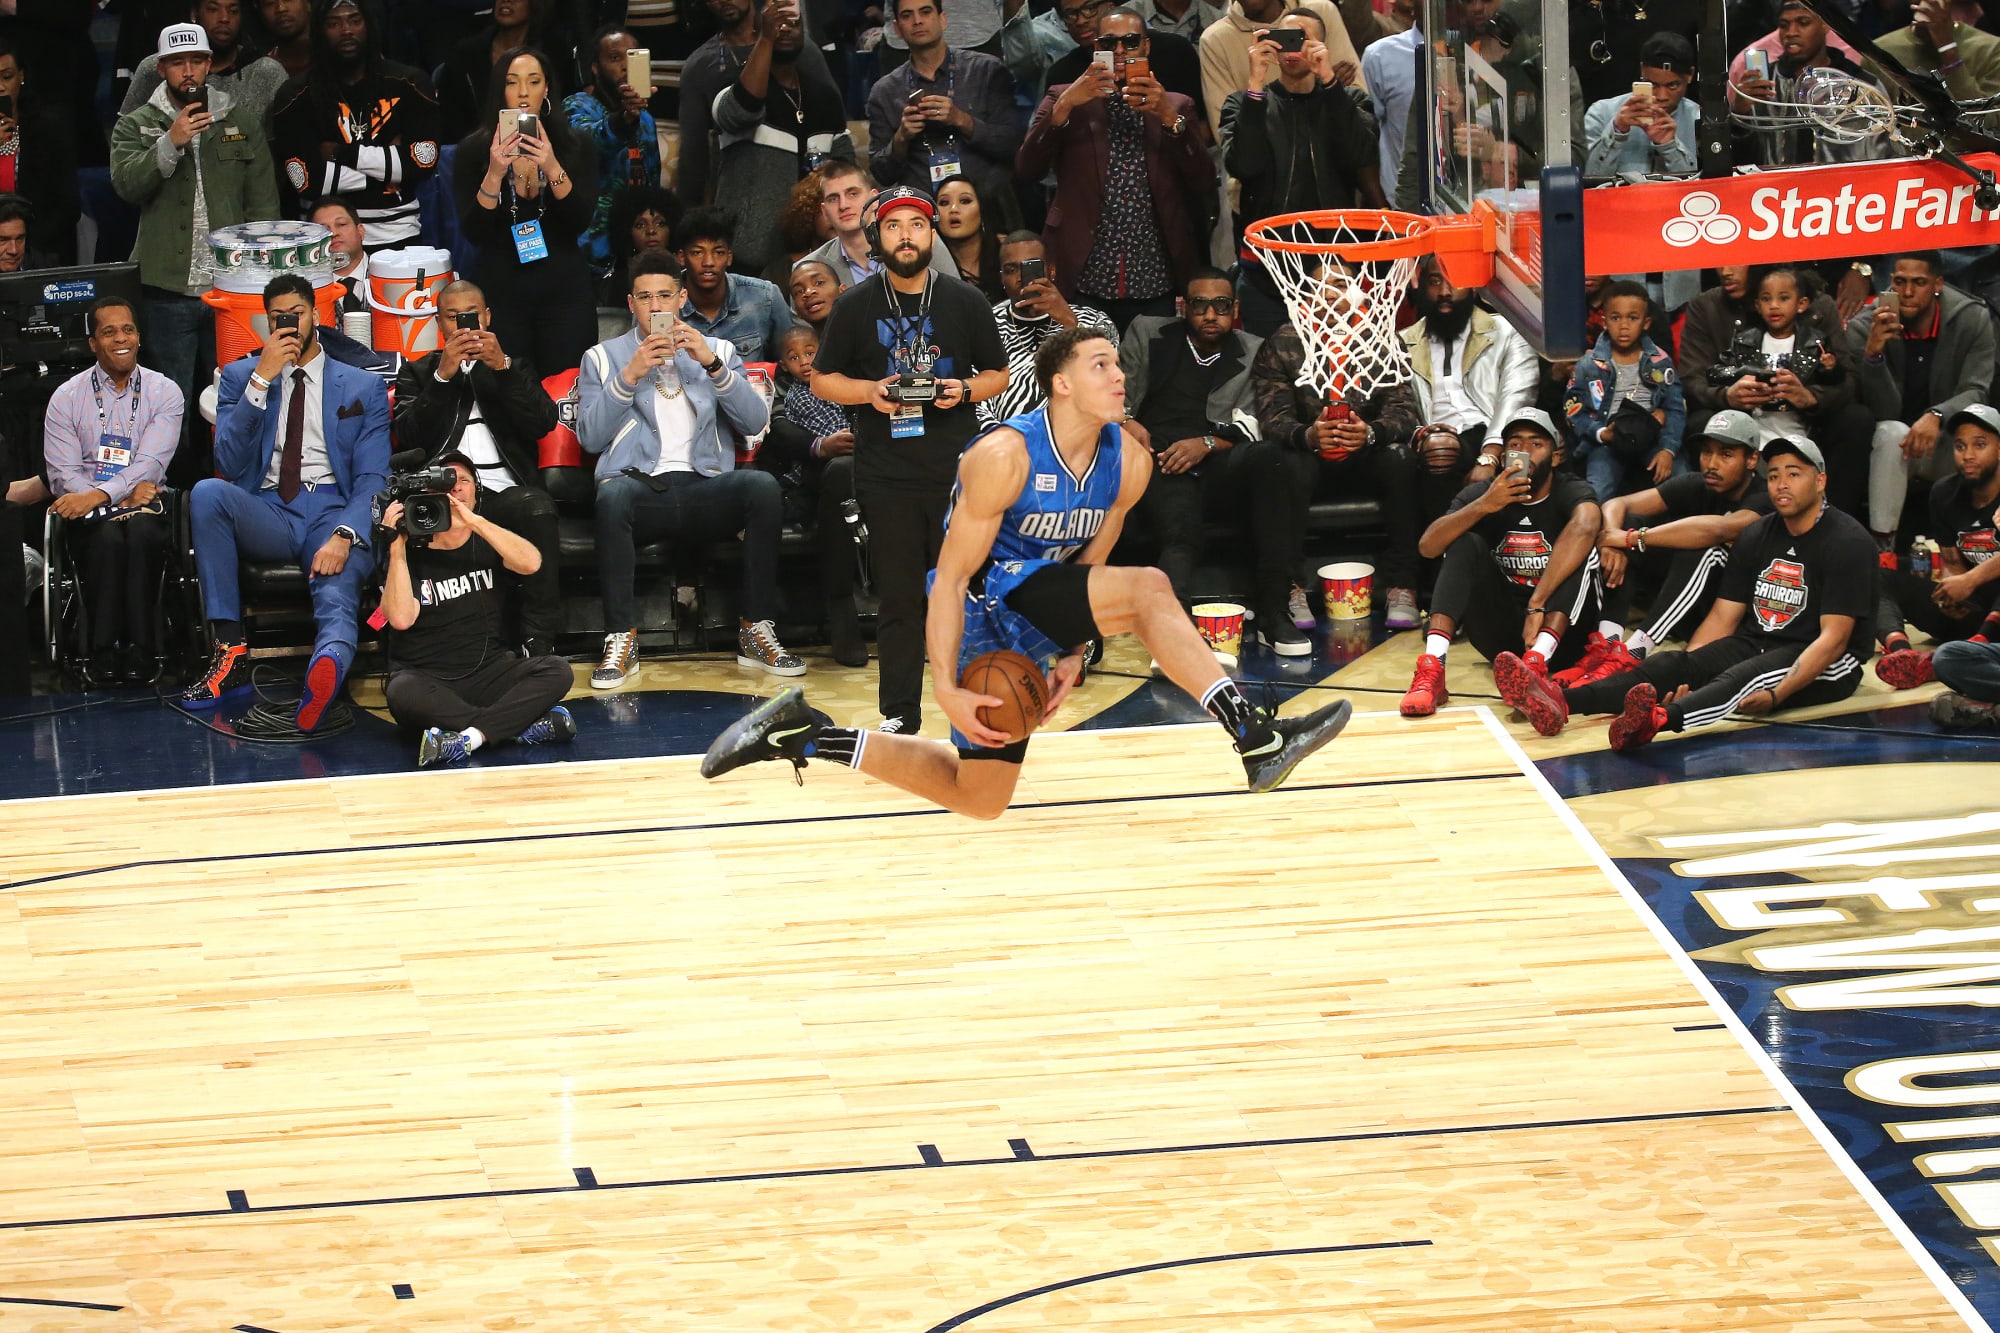 Aaron Gordon open to return to Dunk Contest at AllStar Weekend